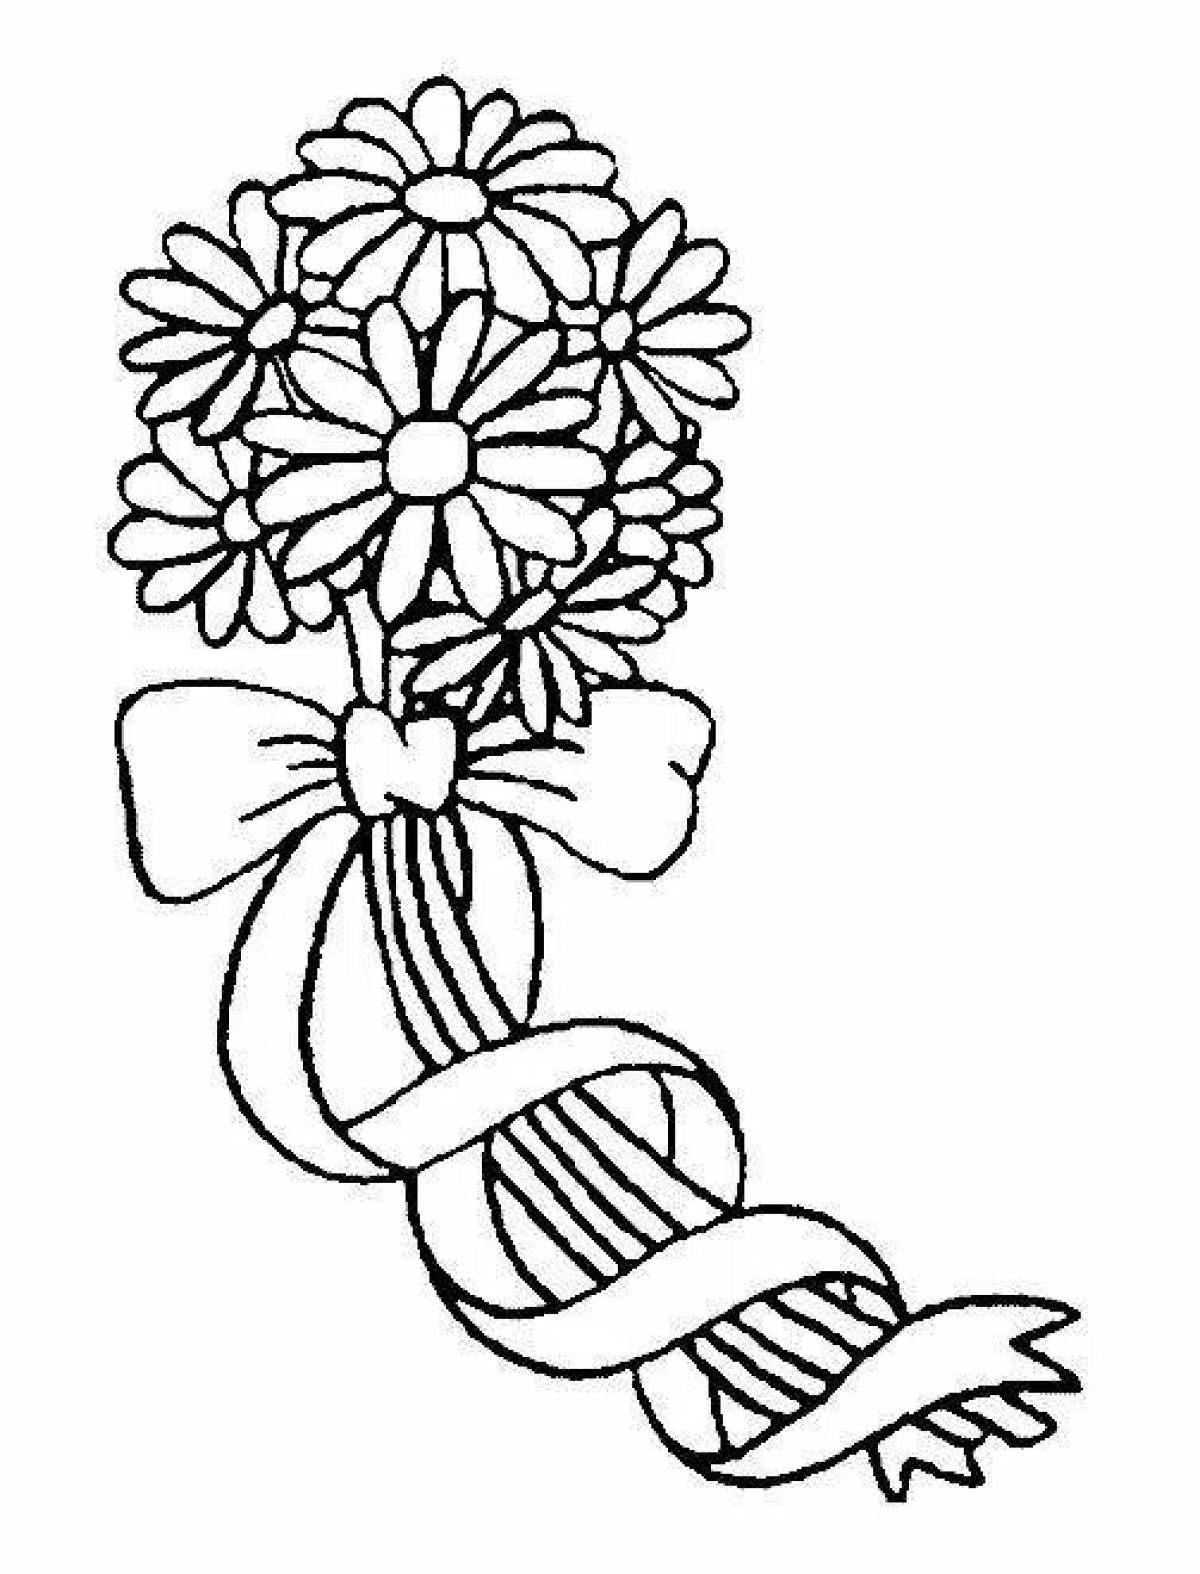 Fun coloring carnation with St. George ribbon